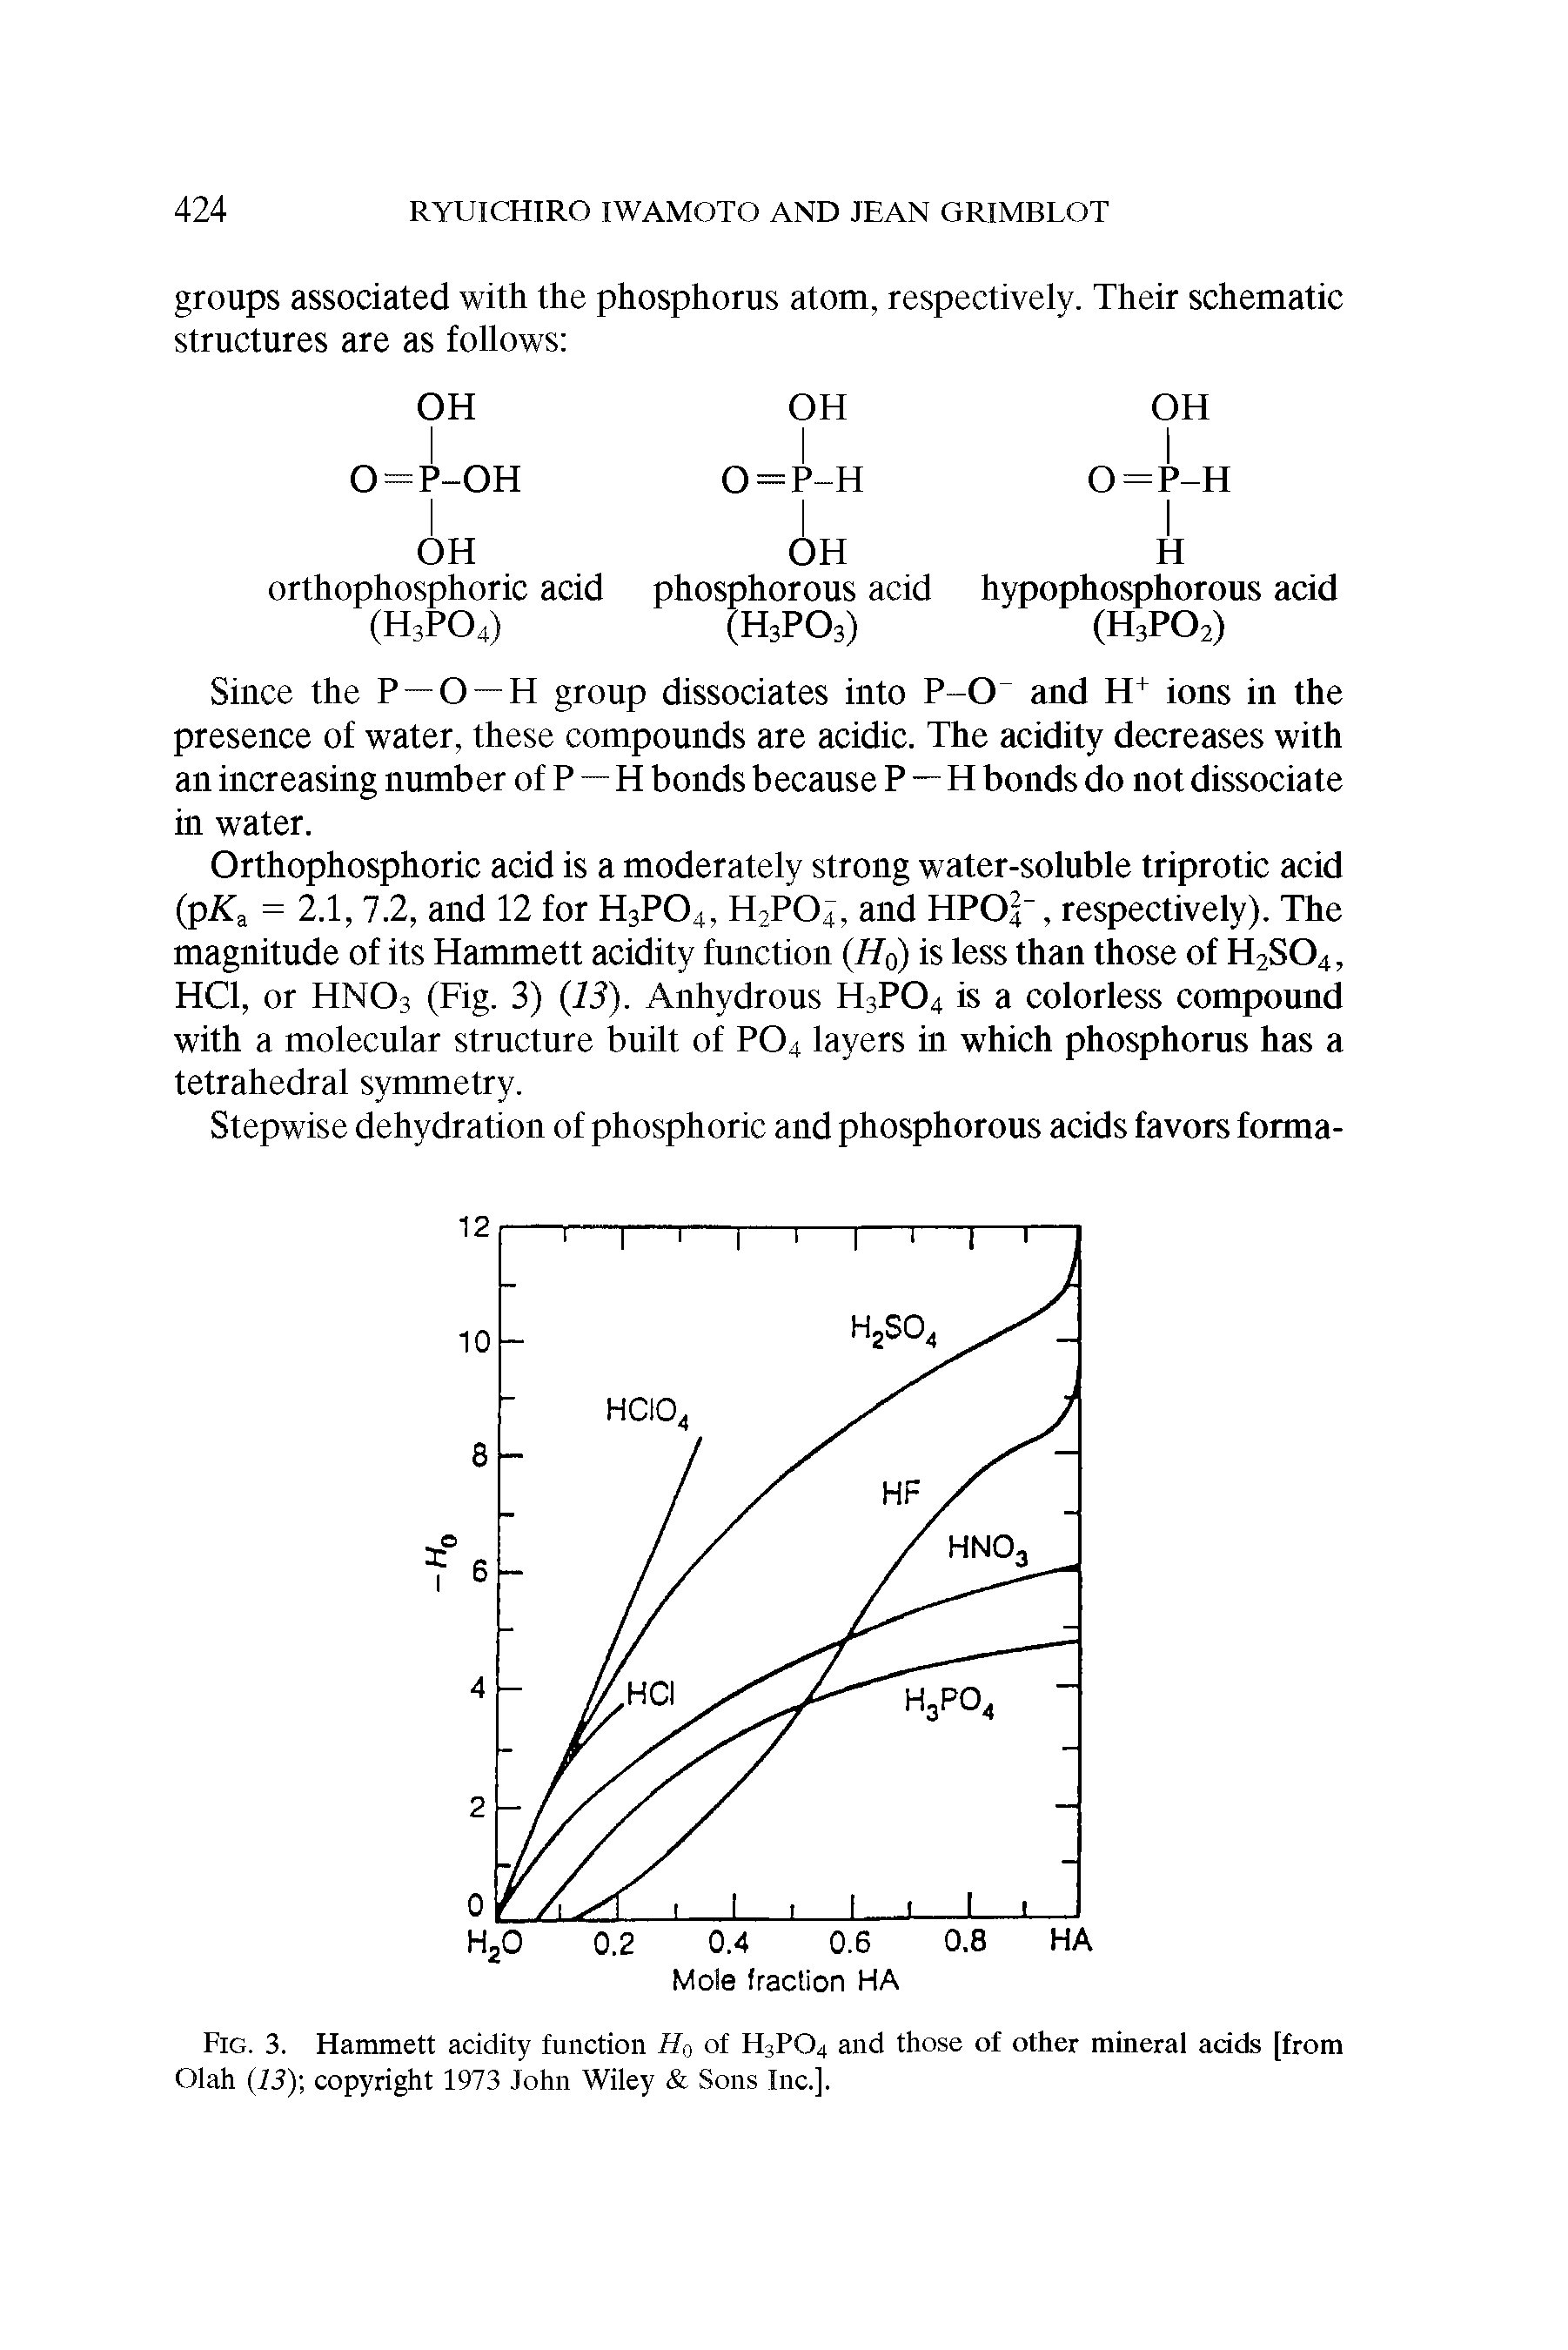 Fig. 3. Hammett acidity function Ho of H3PO4 and those of other mineral adds [from Olah (i3) copyright 1973 John Wiley Sons Inc.].